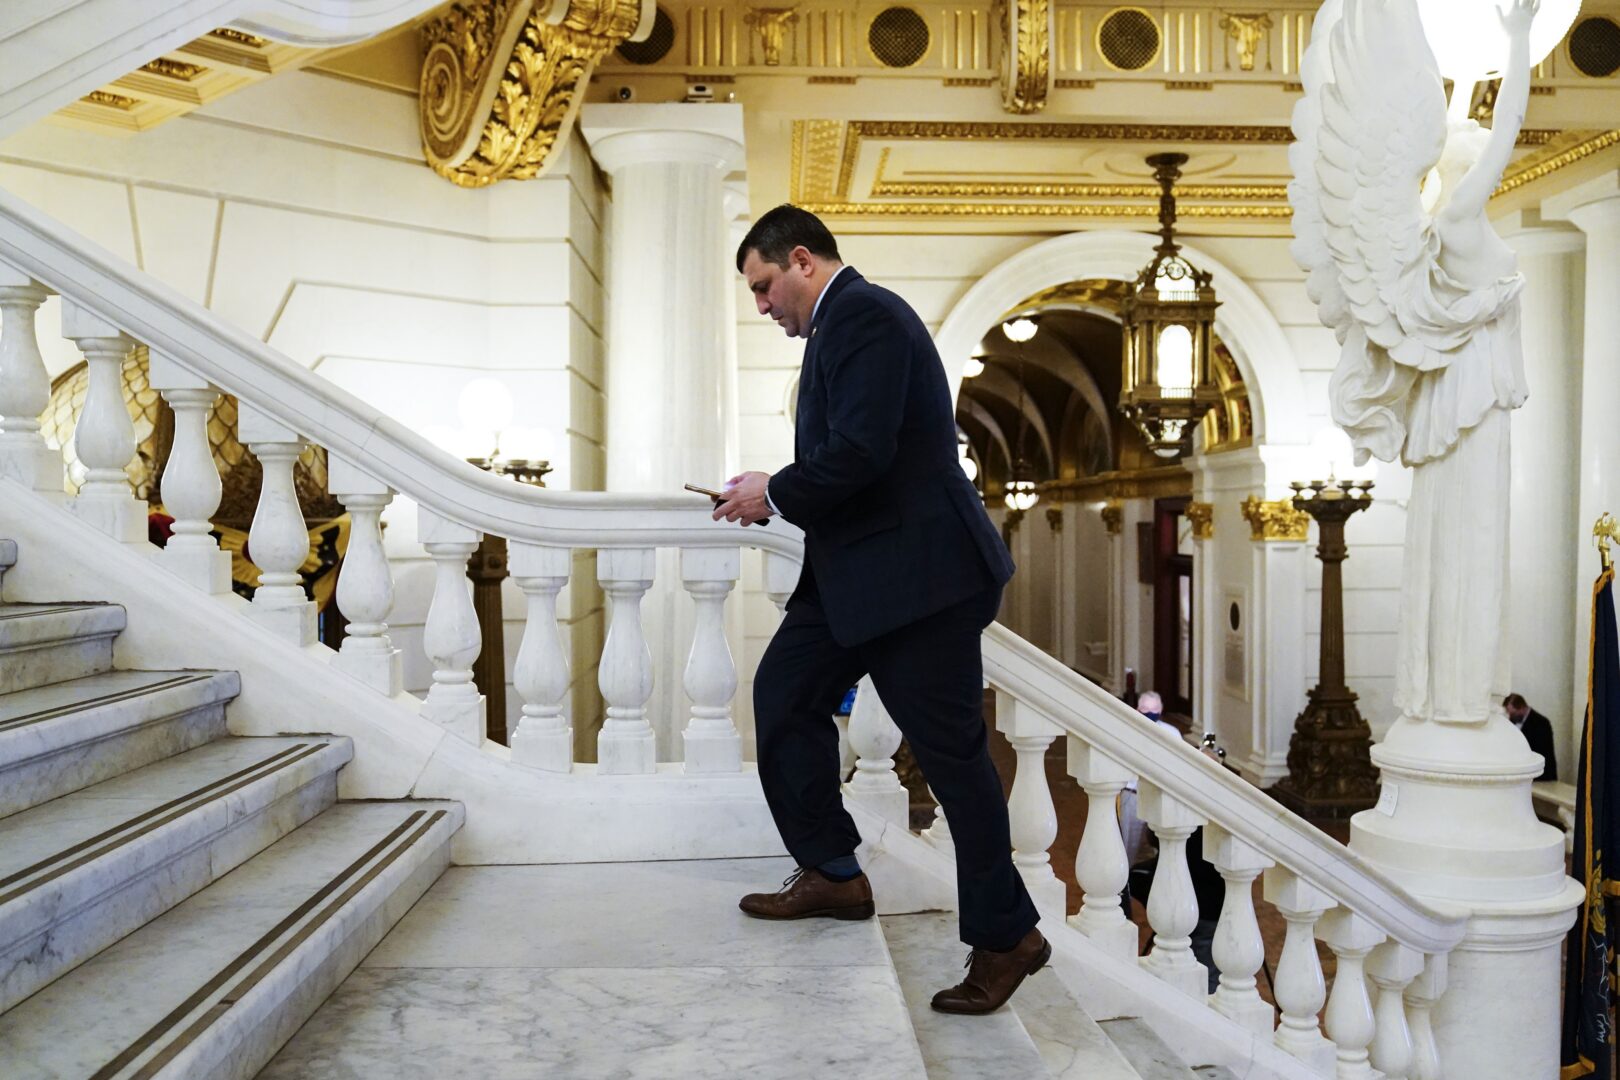 Rep. Mark Rozzi, D-Berks, checks his phone after speaking with members of the media at the Capitol in Harrisburg, Pa., Monday, March 22, 2021.  